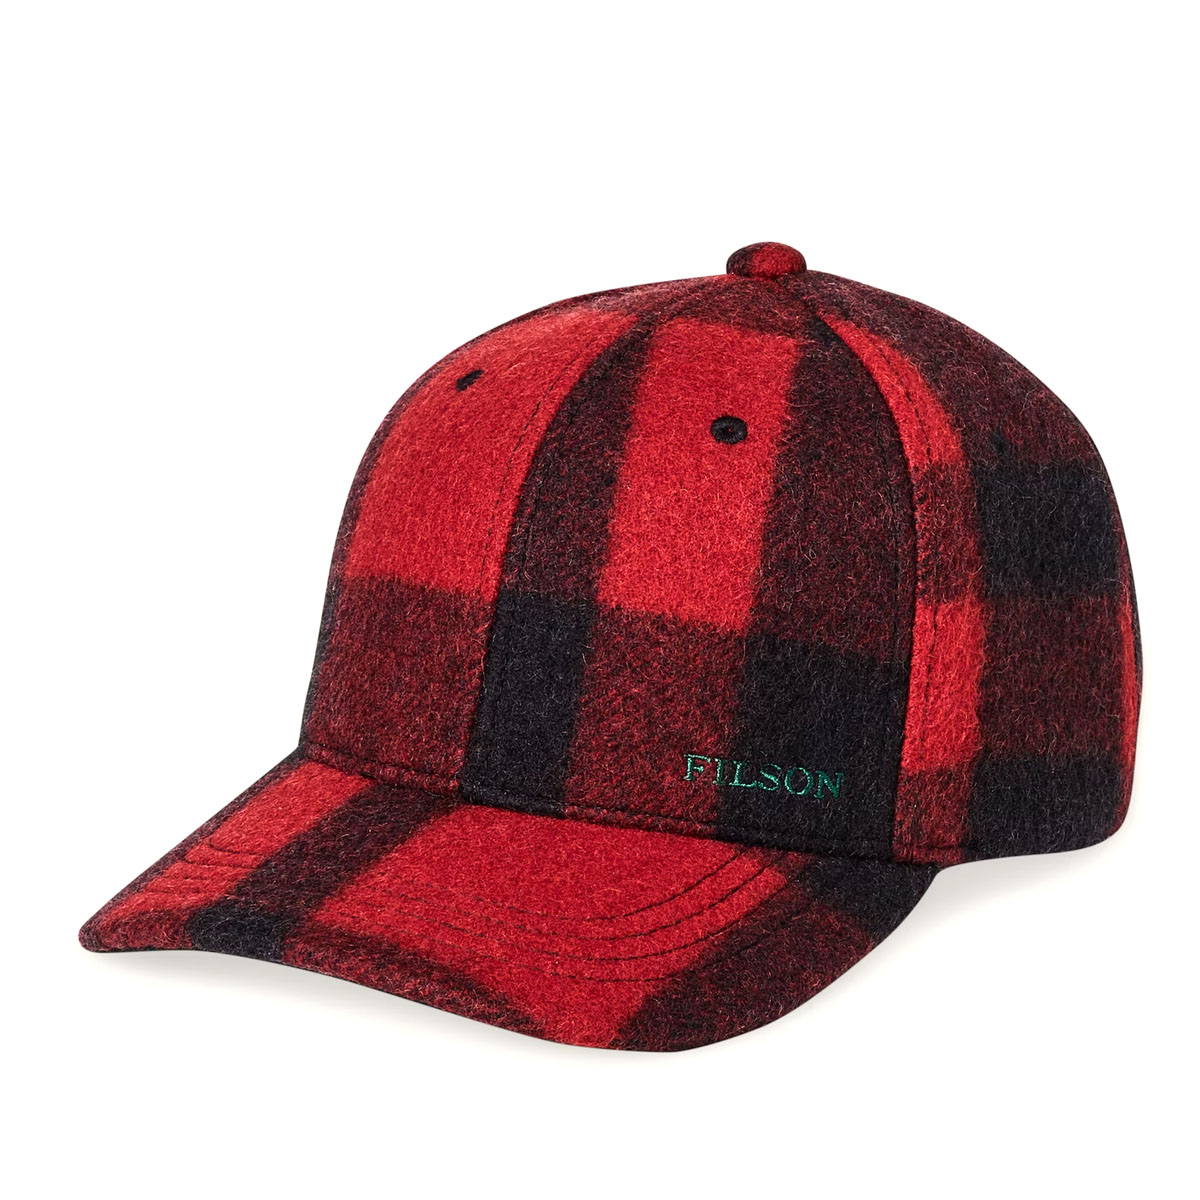 Filson Wool Logger Cap Red/Black Heritage Plaid, Filson's warmest logger cap, made with weather-resistant Mackinaw Wool